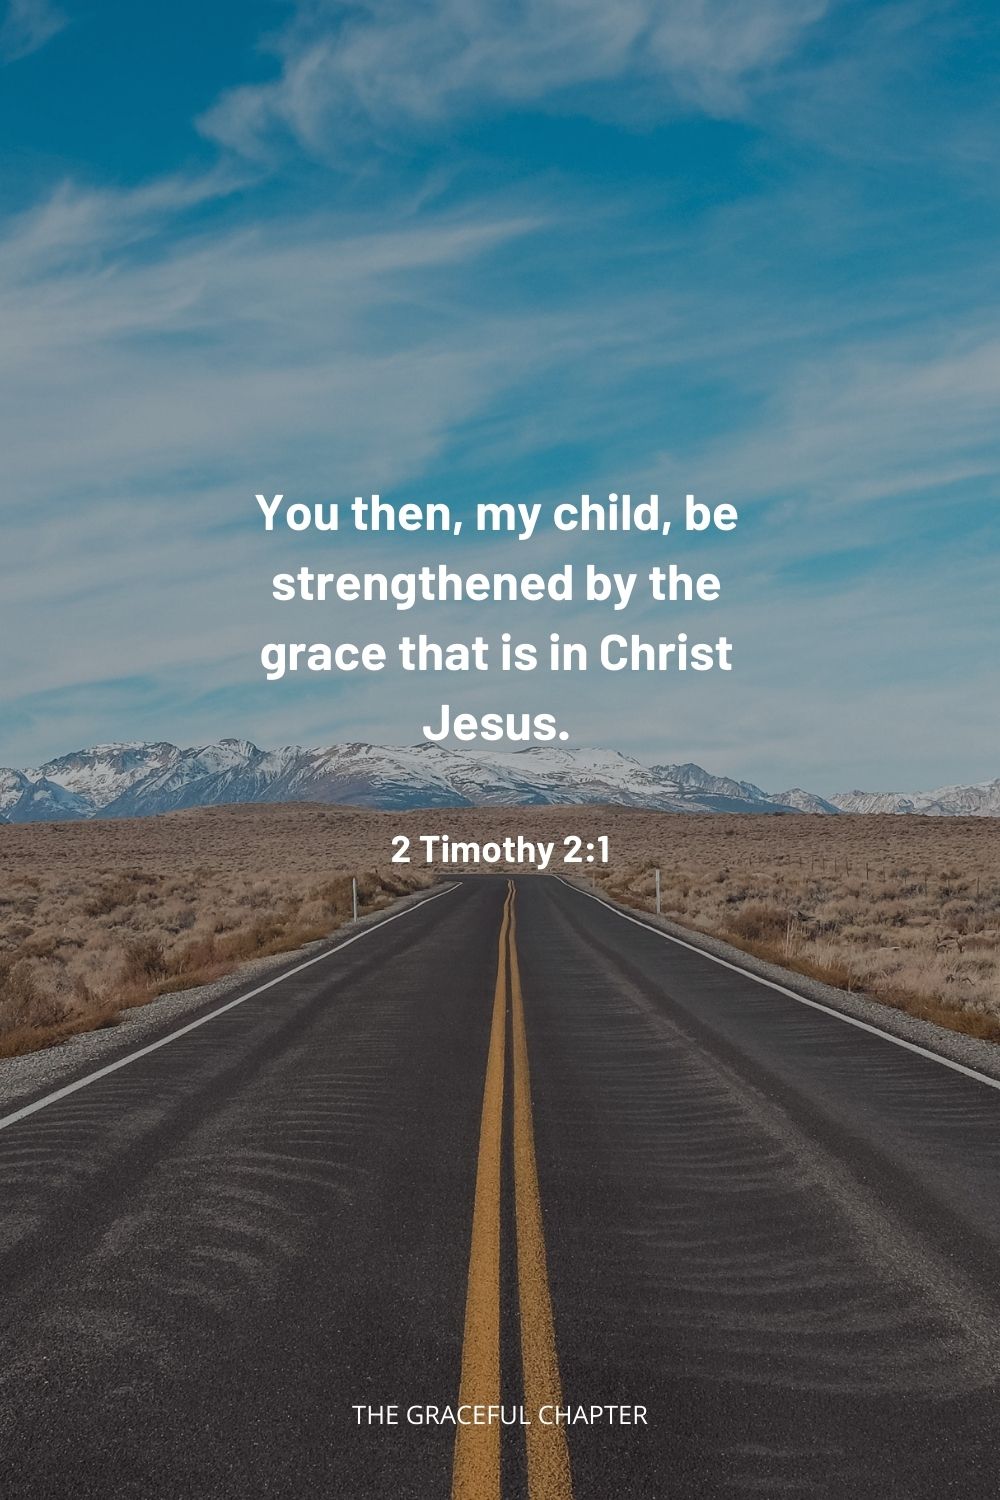 You then, my child, be strengthened by the grace that is in Christ Jesus. 2 Timothy 2:1